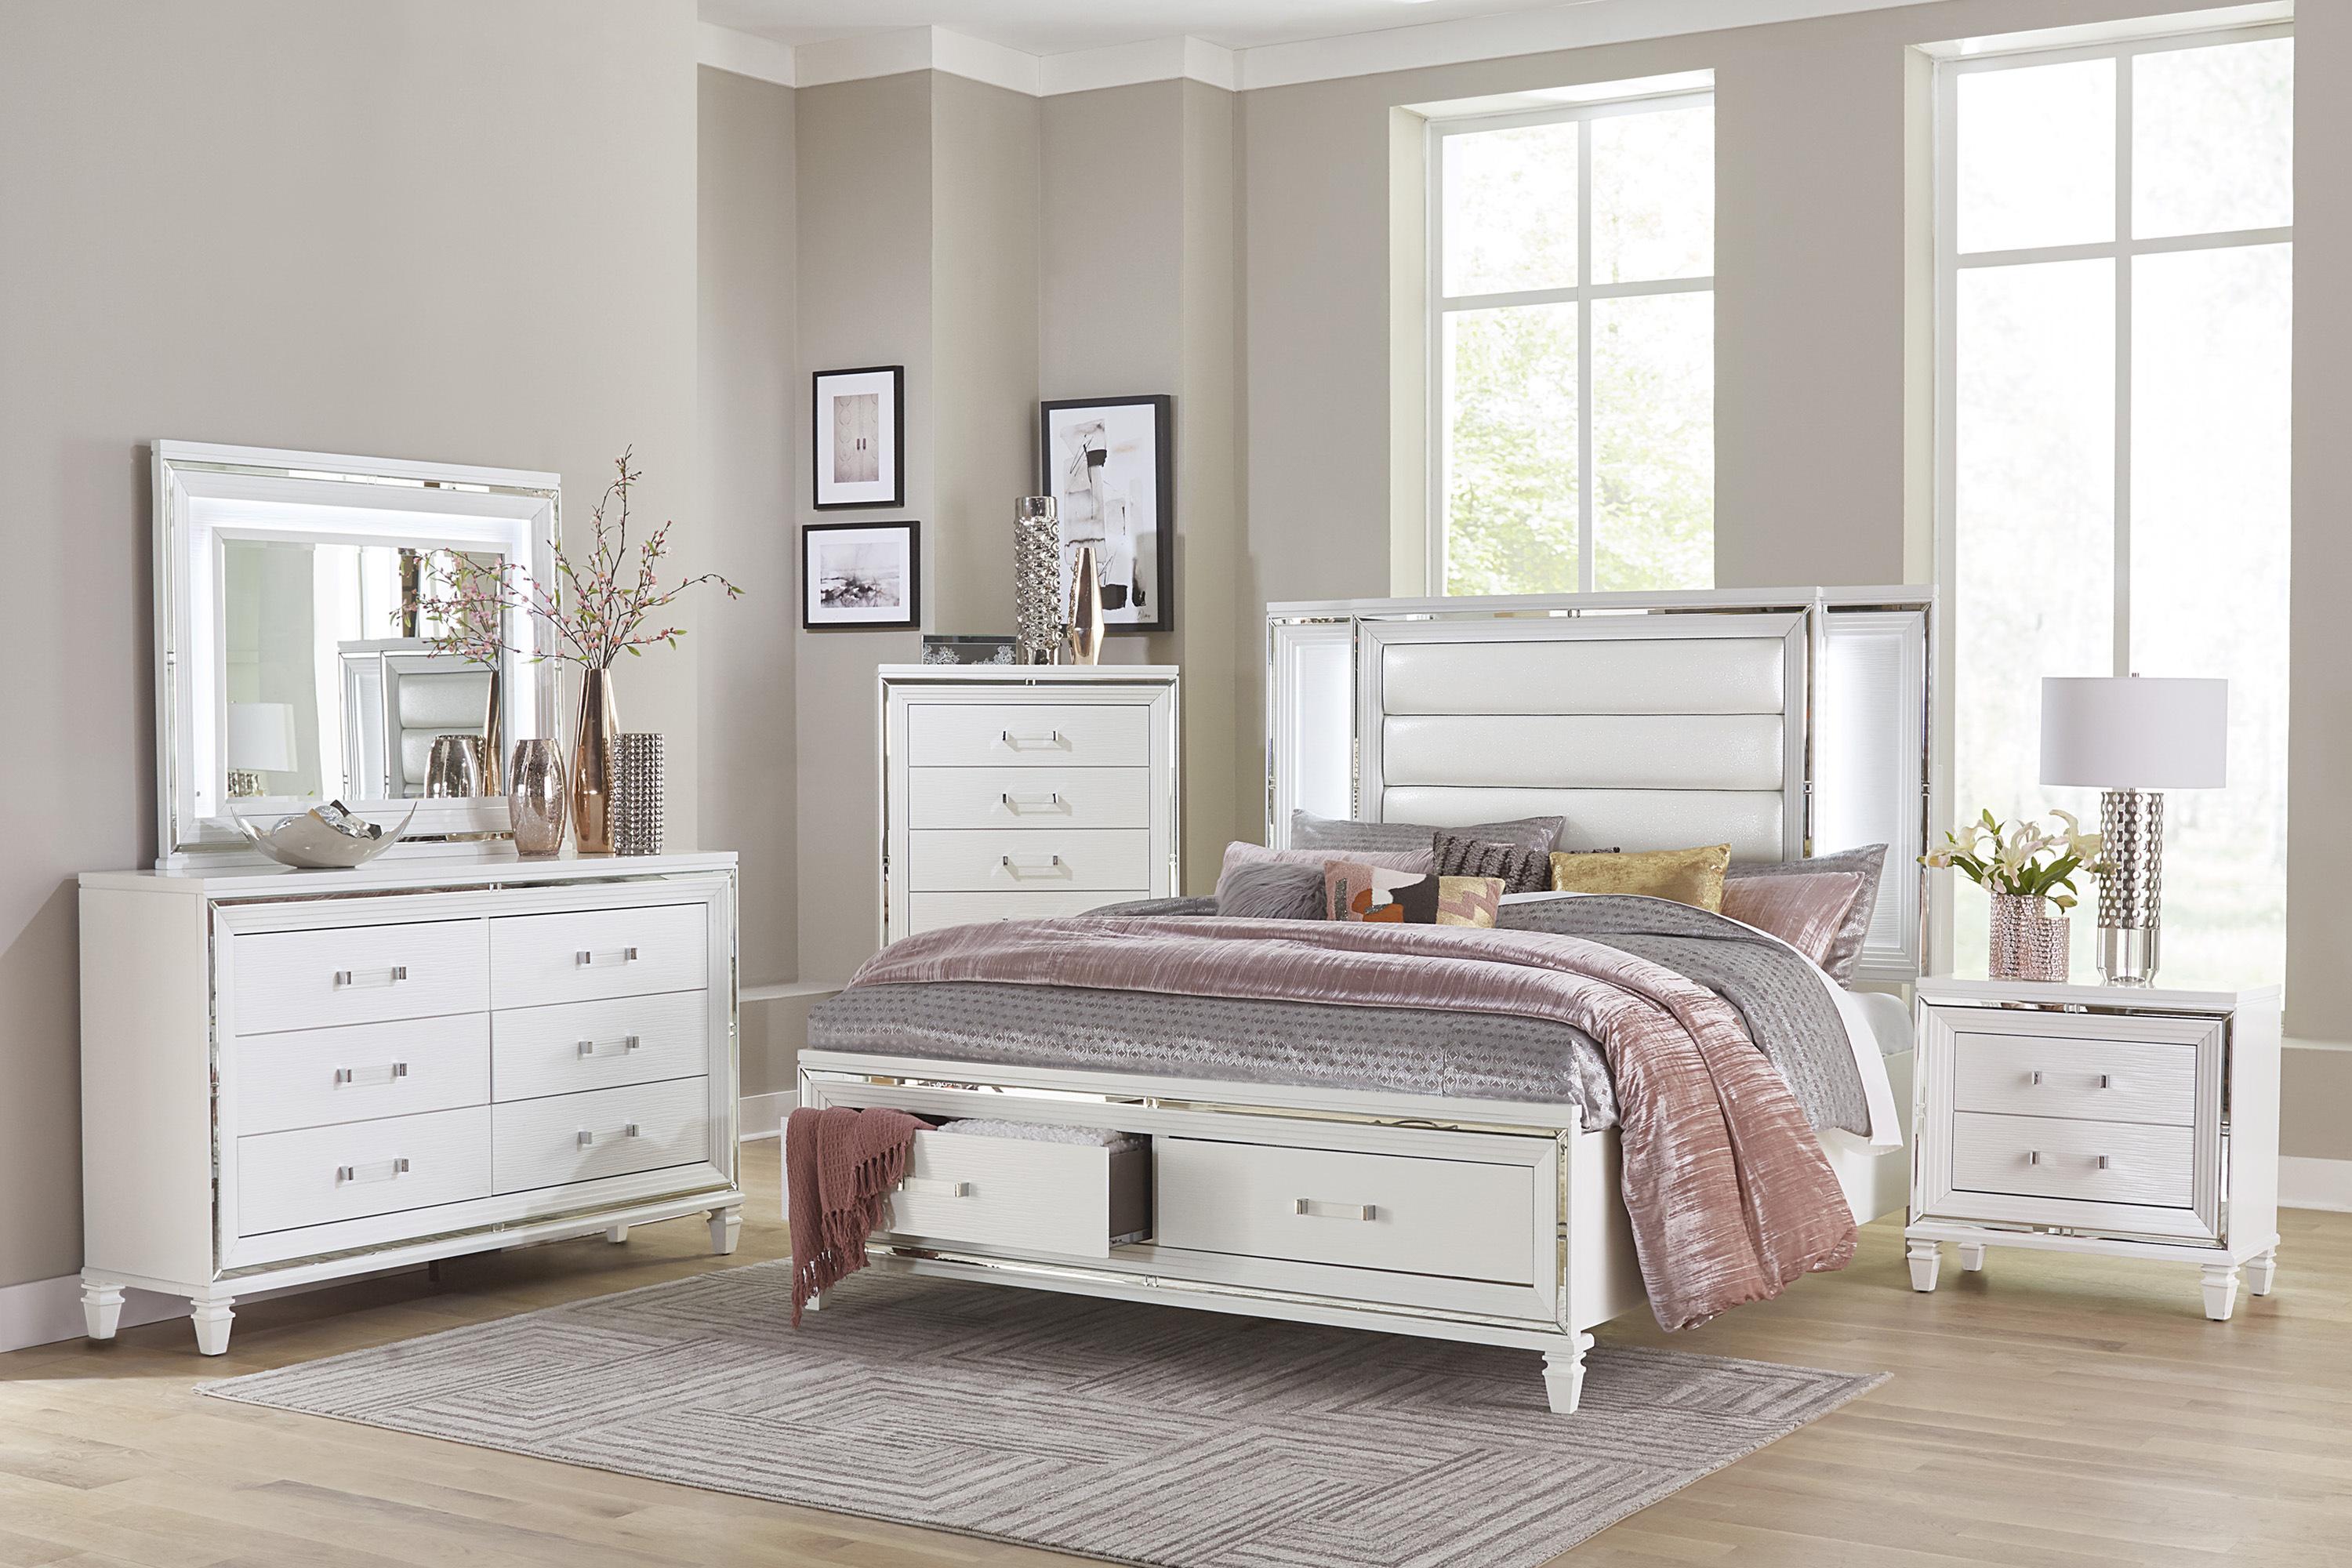 Modern Bedroom Set 1616WK-1CK-6PC Tamsin 1616WK-1CK-6PC in White Faux Leather